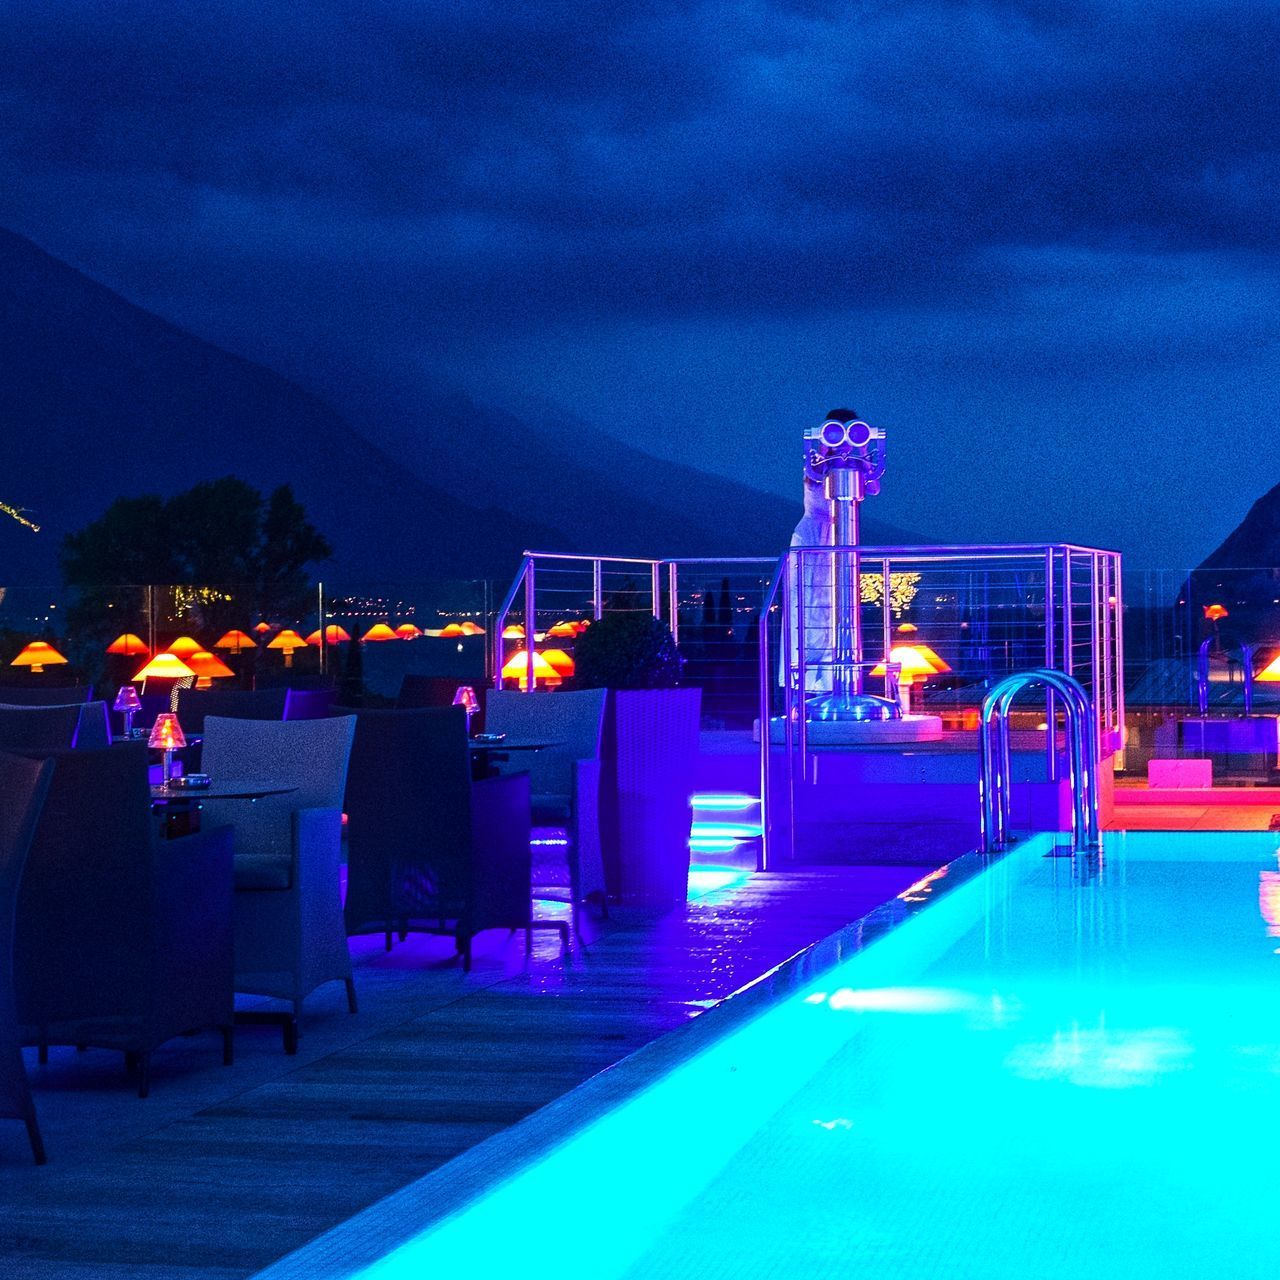 ILLUMINATED CHAIRS BY SWIMMING POOL AT NIGHT